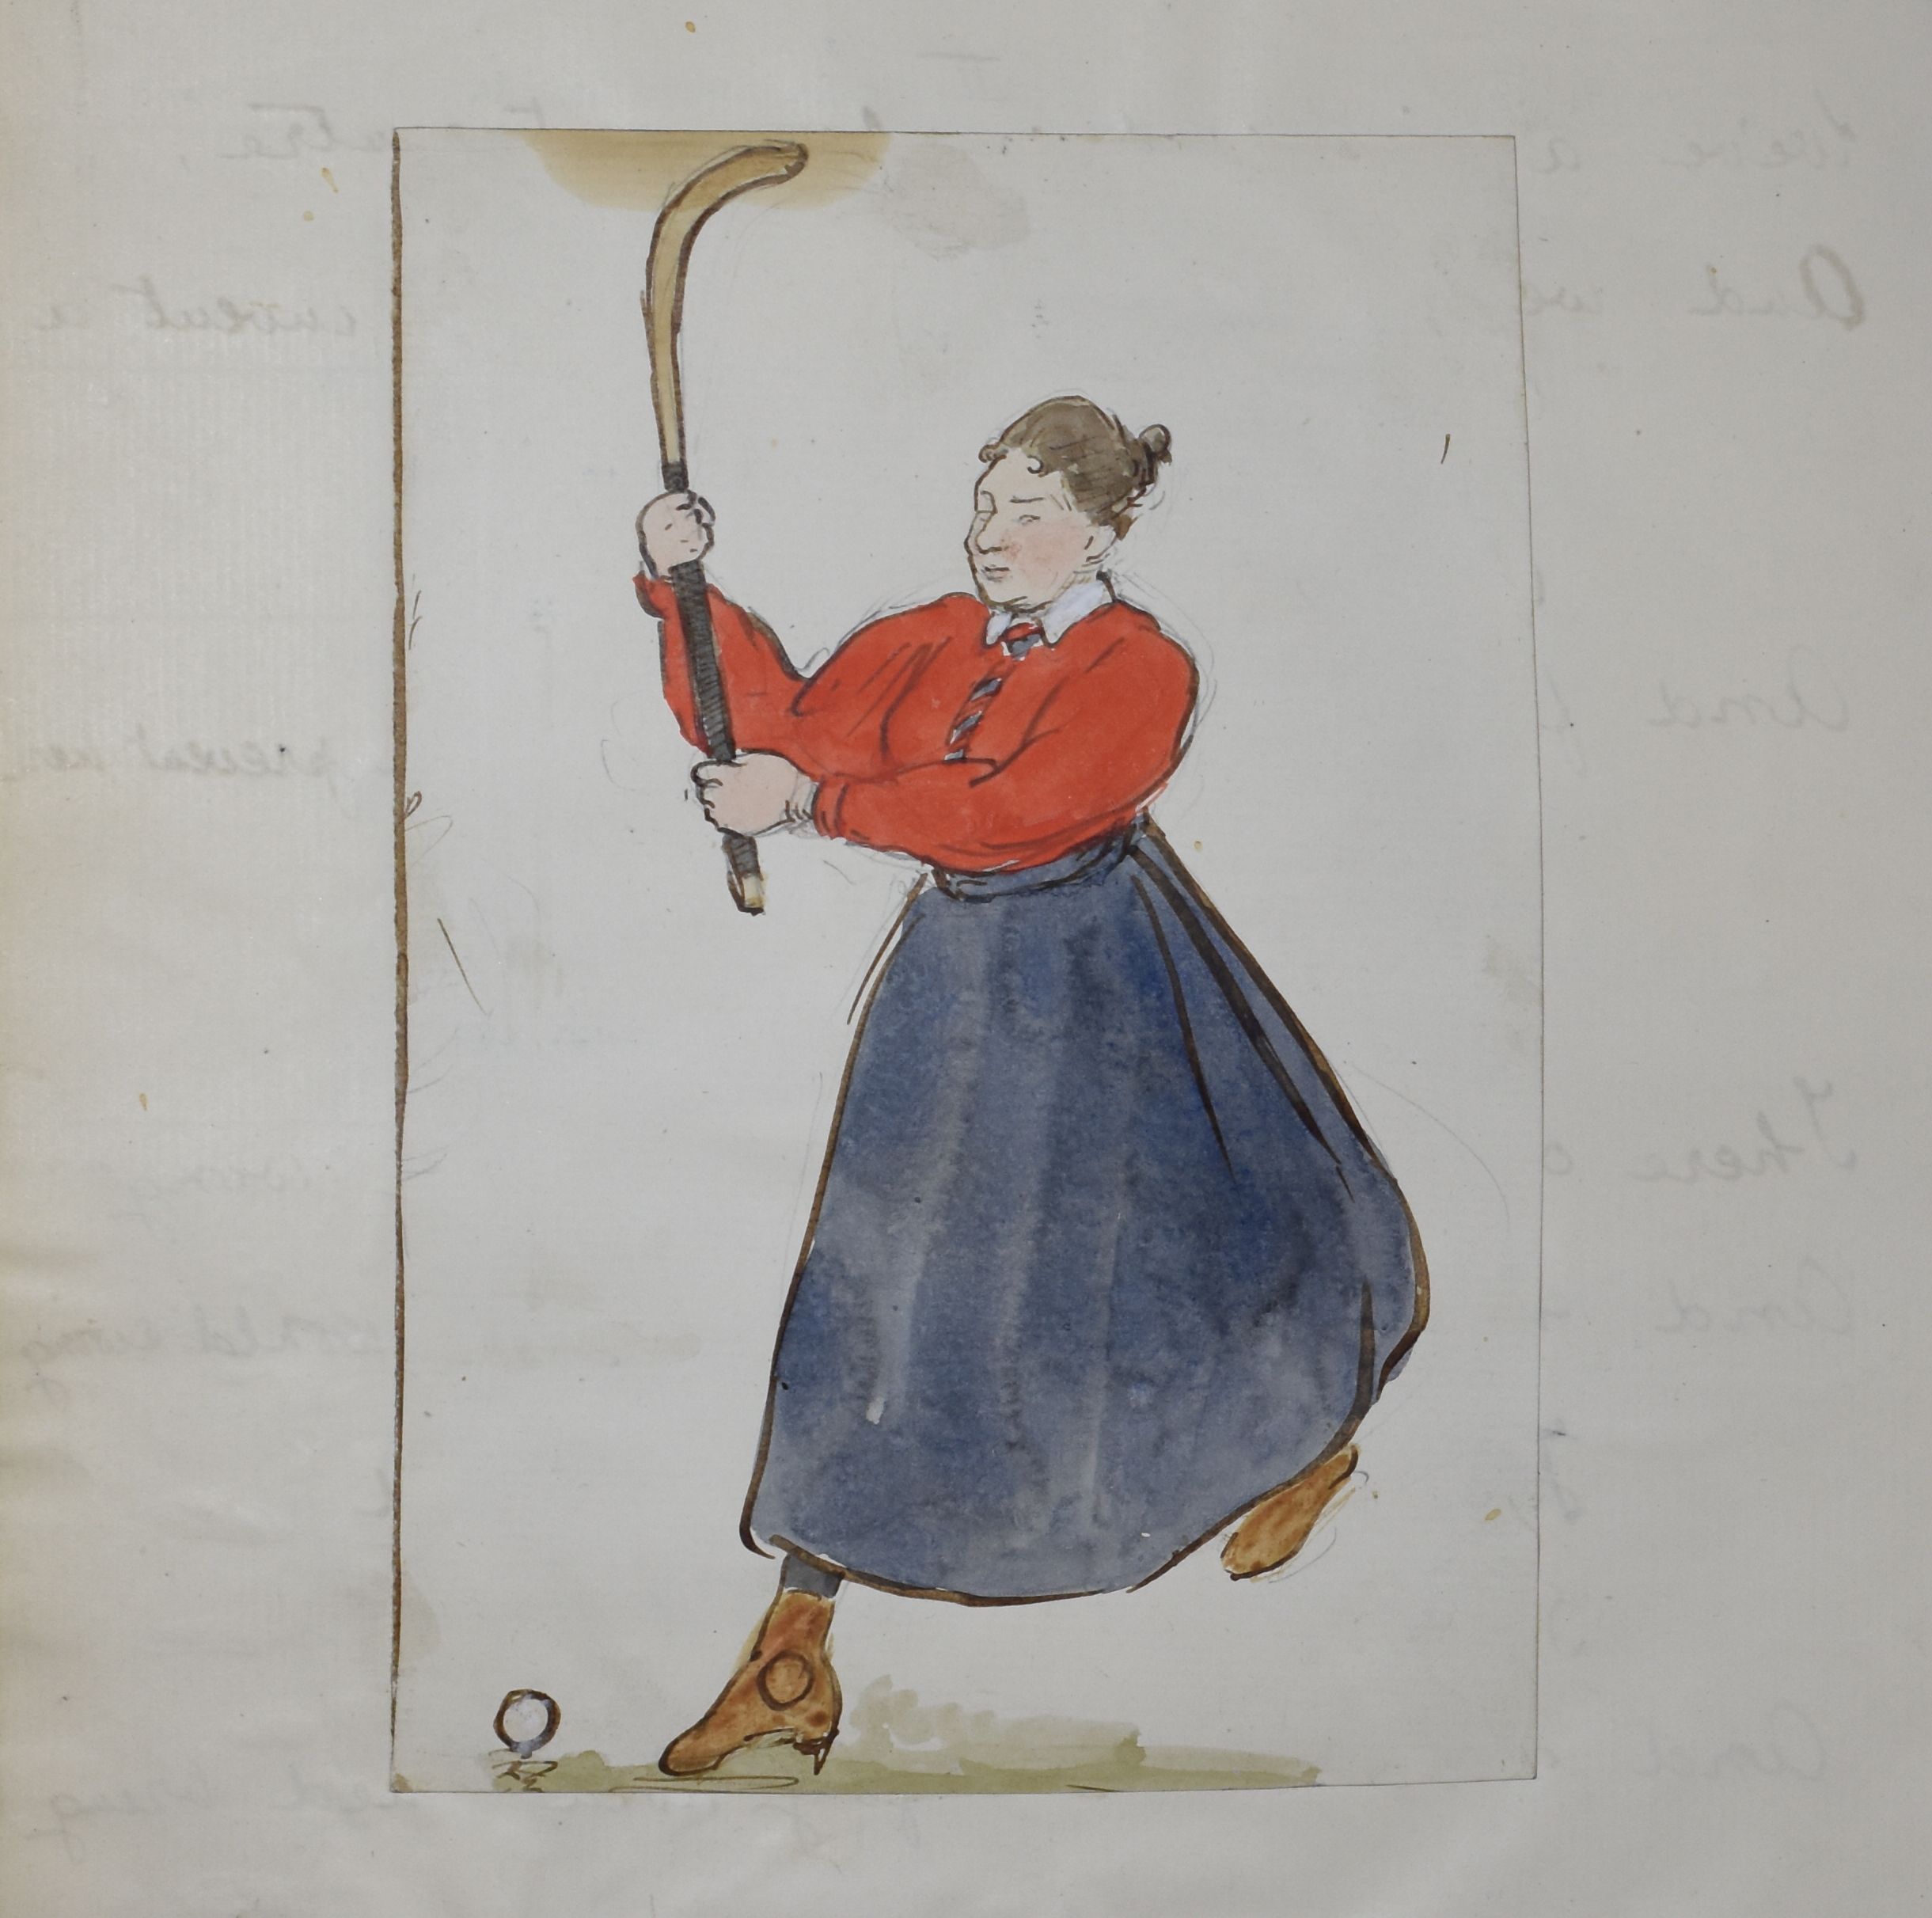 Softback scrapbook illustrated on the front cover and inscribed ‘Hockey Jottings: For private circulation only’ compiled by D Gwyn Jeffreys, W Gwyn Jeffreys and E M Thompson, 1898.